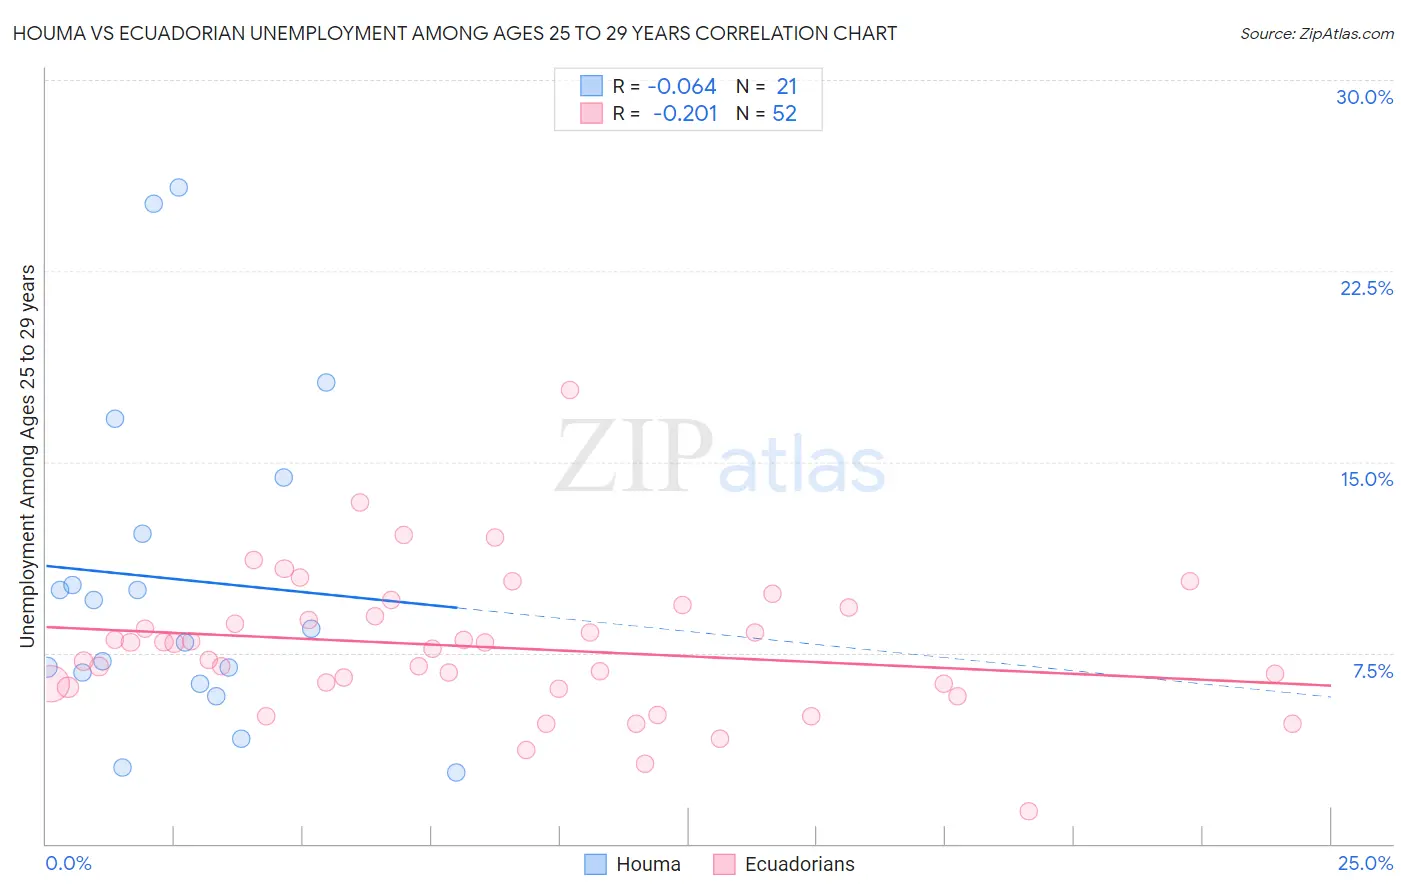 Houma vs Ecuadorian Unemployment Among Ages 25 to 29 years